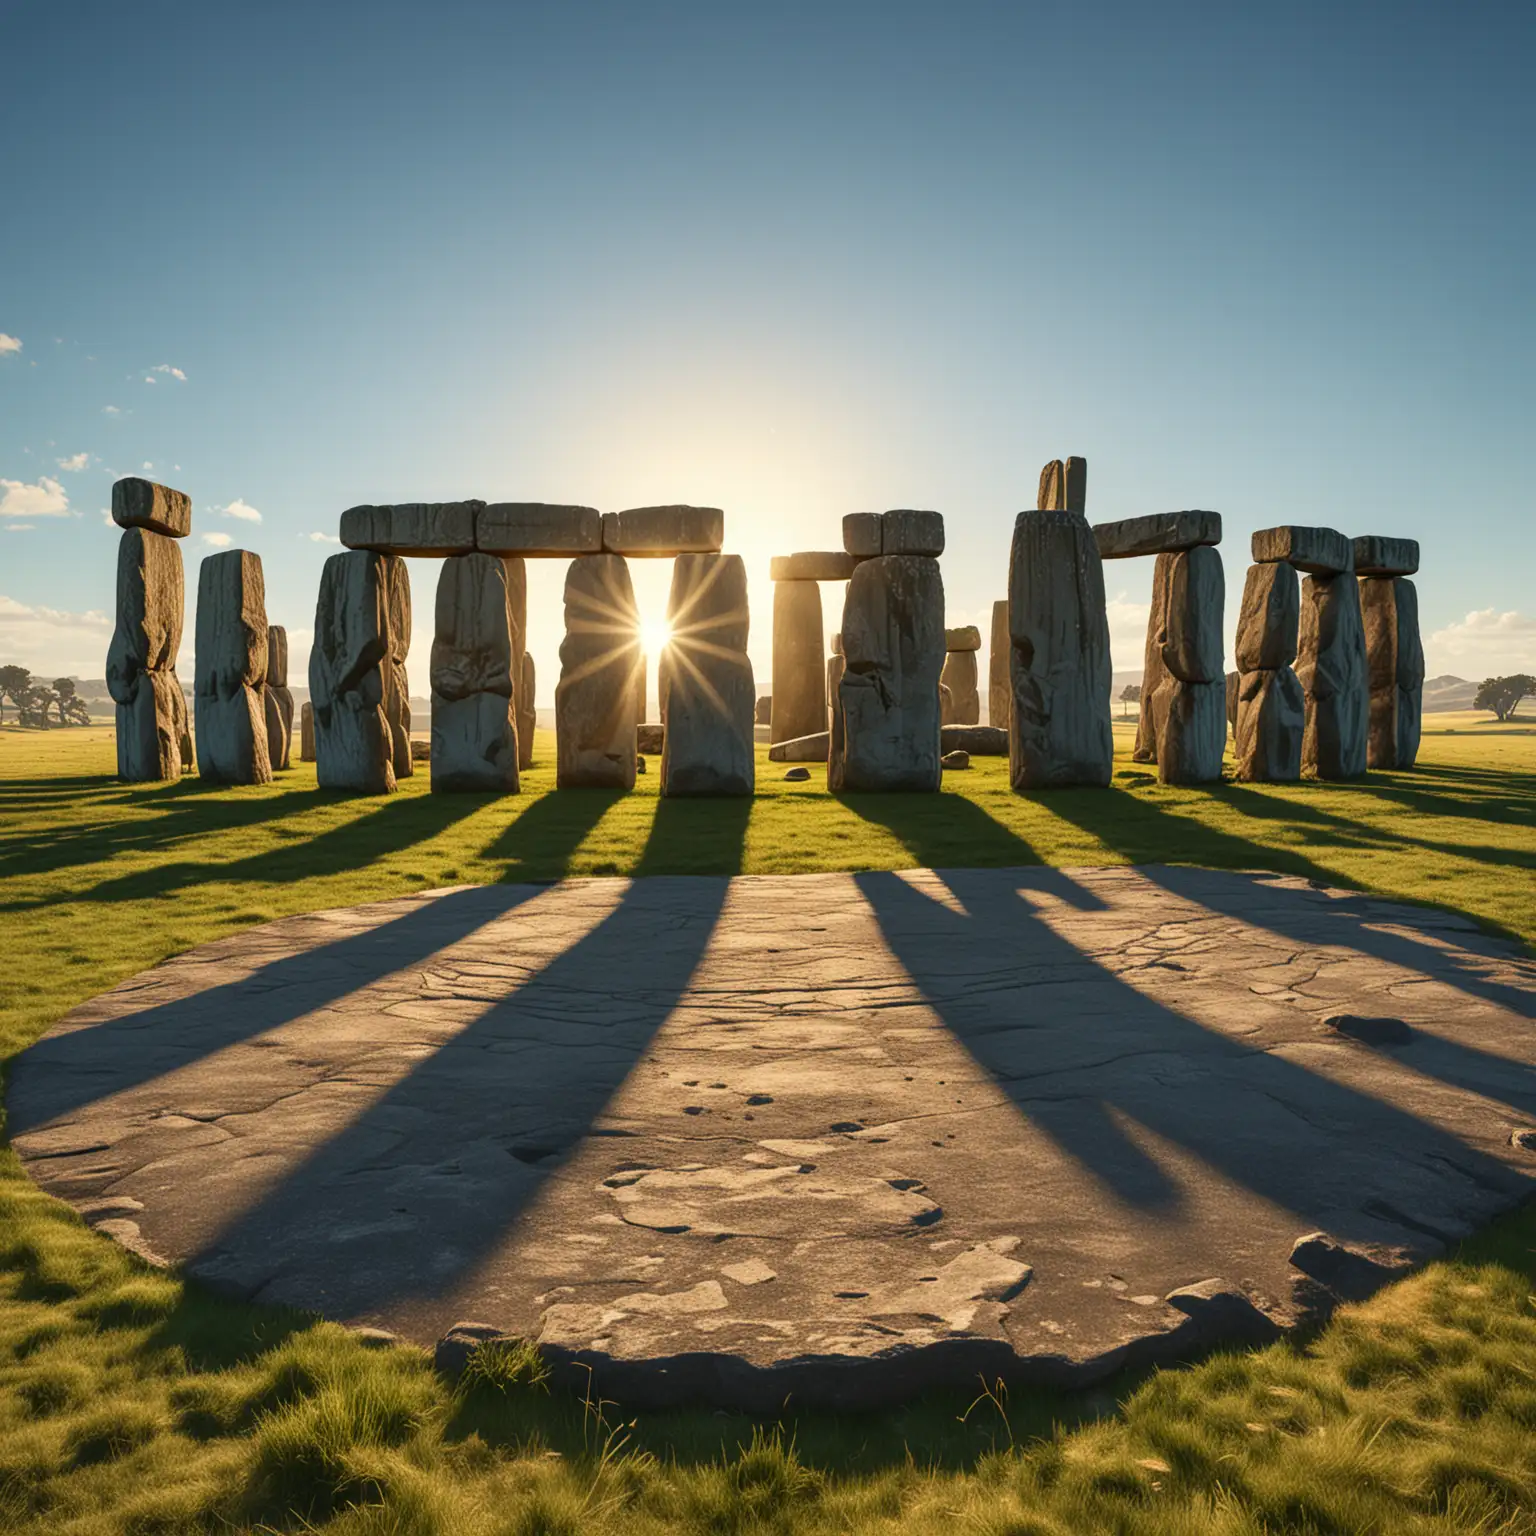 Majestic Stonehenge standing tall against a clear blue sky, Ancient stones arranged in a circular pattern, Soft, golden sunlight casting long shadows, Lush green grass surrounding the monument, Detailed and realistic, Fine art, Detailed and sharp focus, Warm and golden lighting, by René Magritte and Salvador Dalí, Artstation